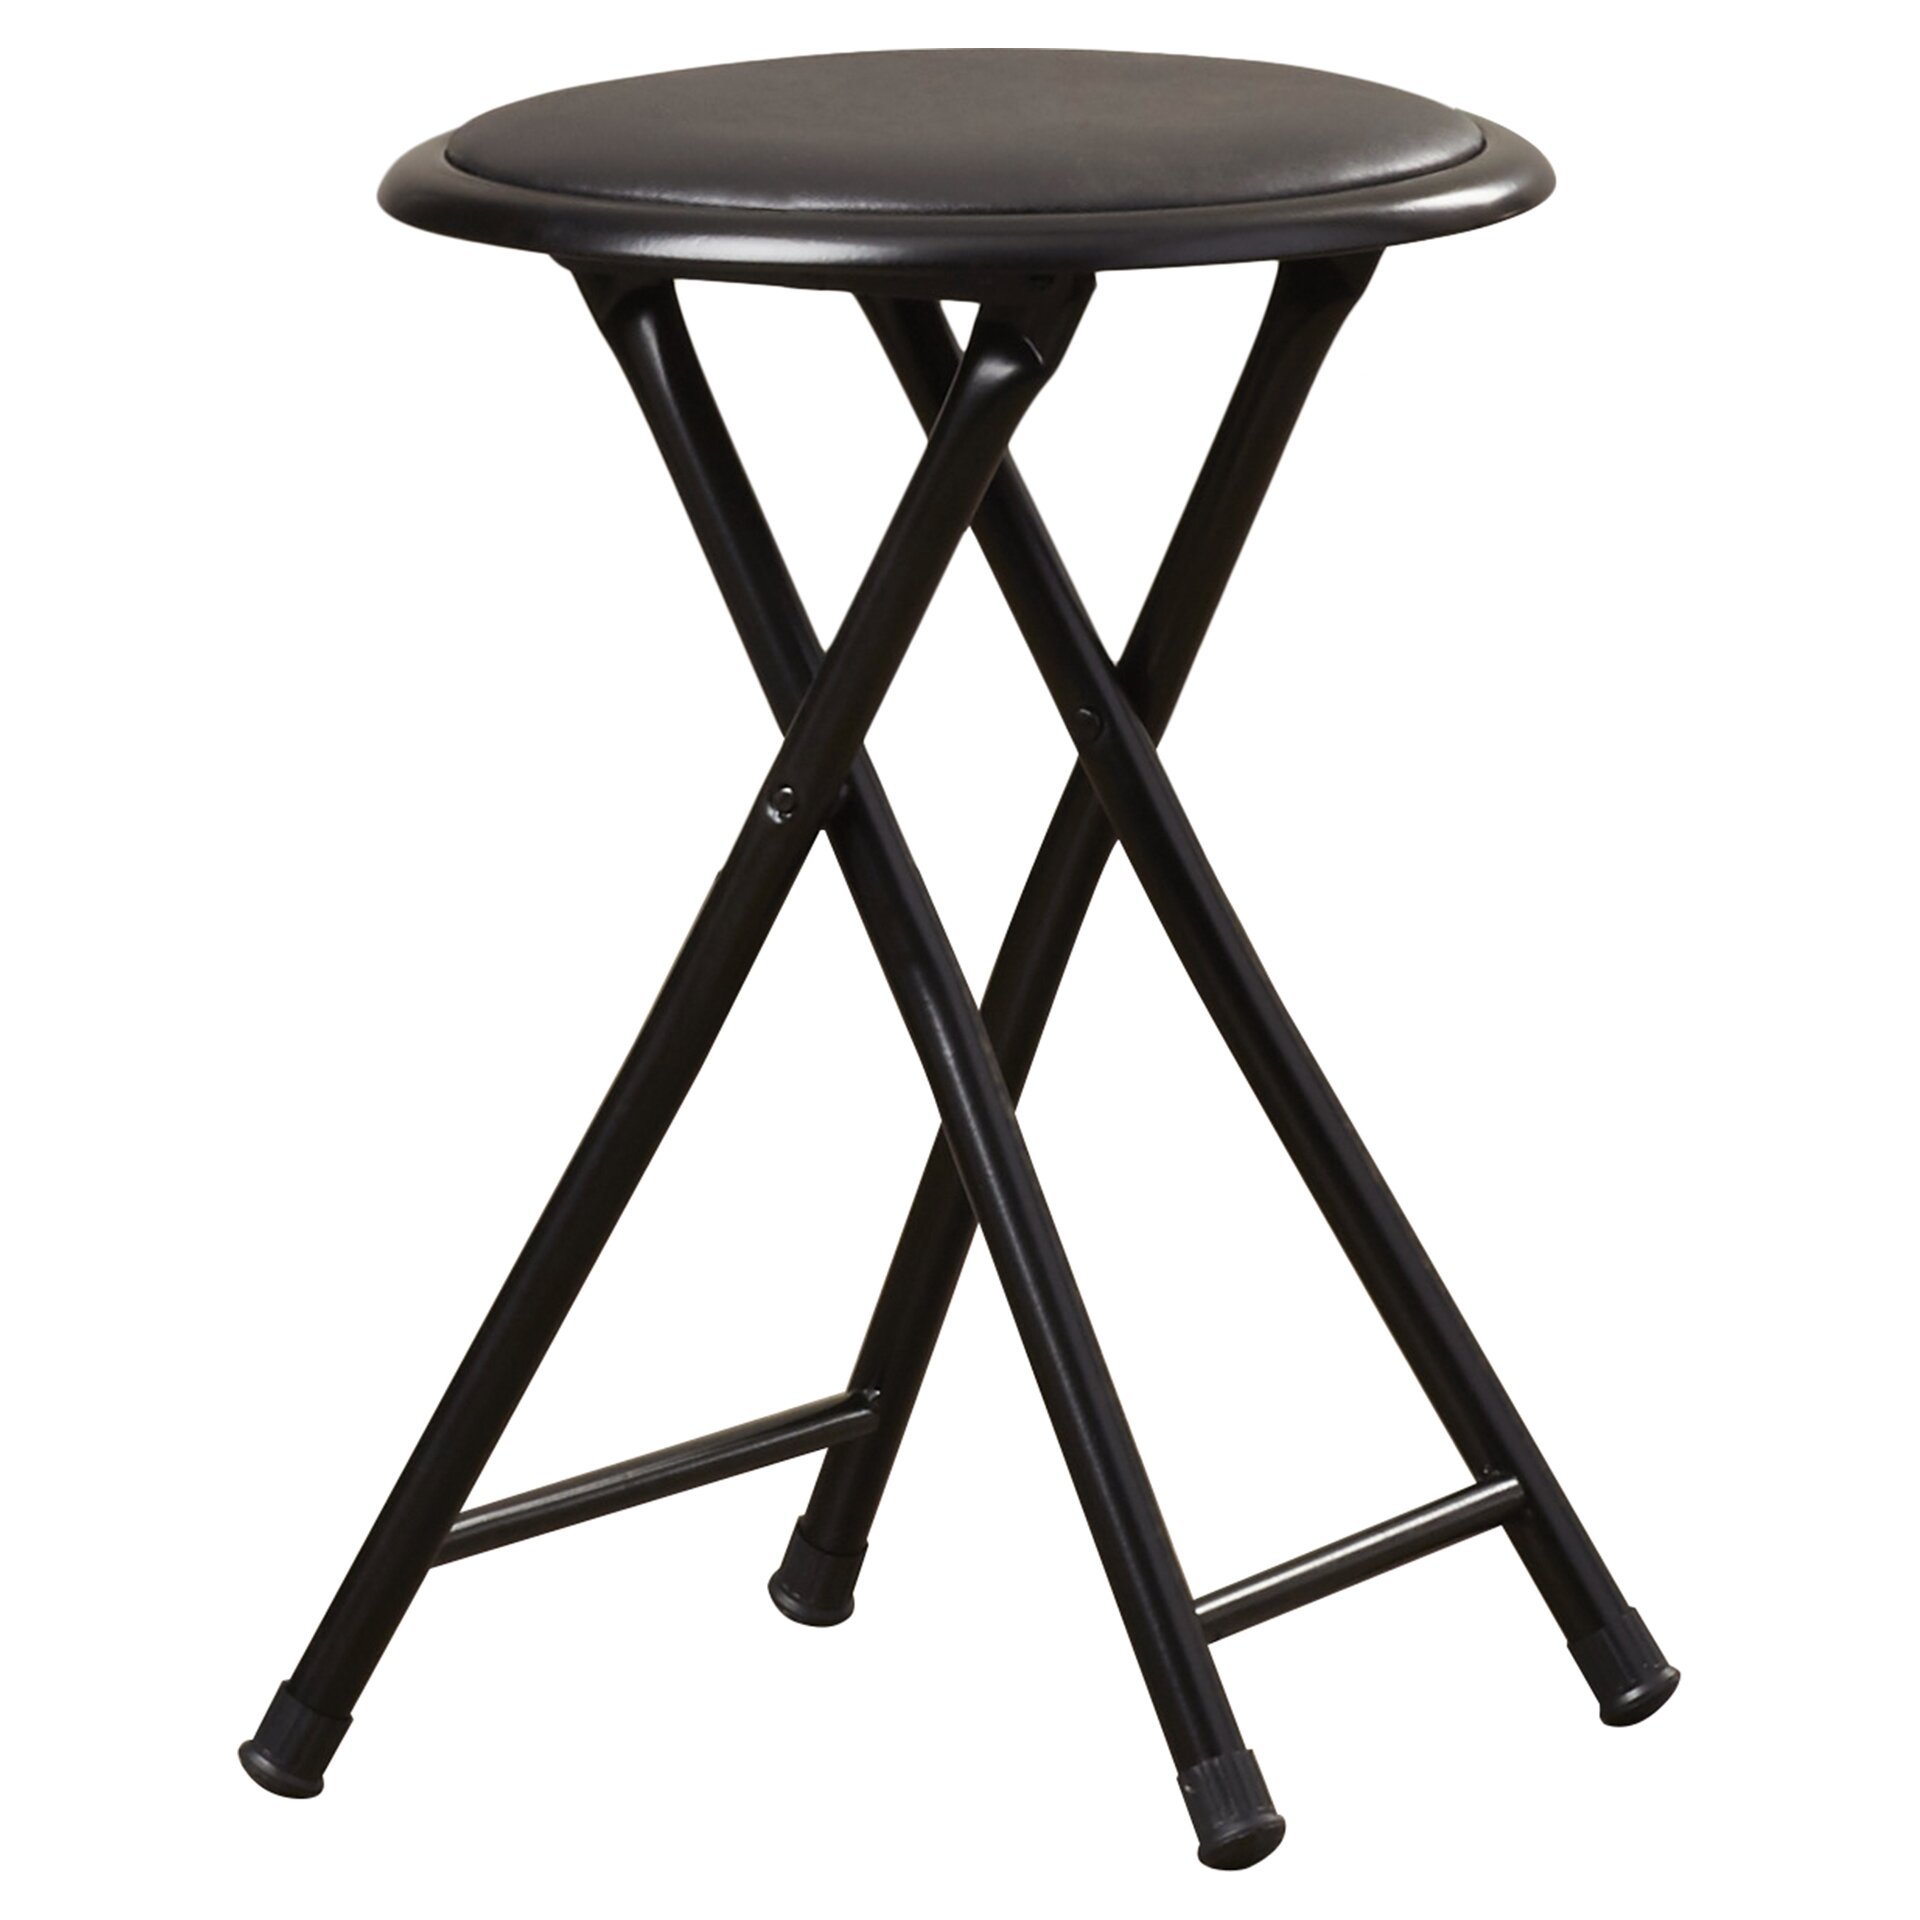 Trademark Home Collection Cushioned Folding Stool 82 7879 